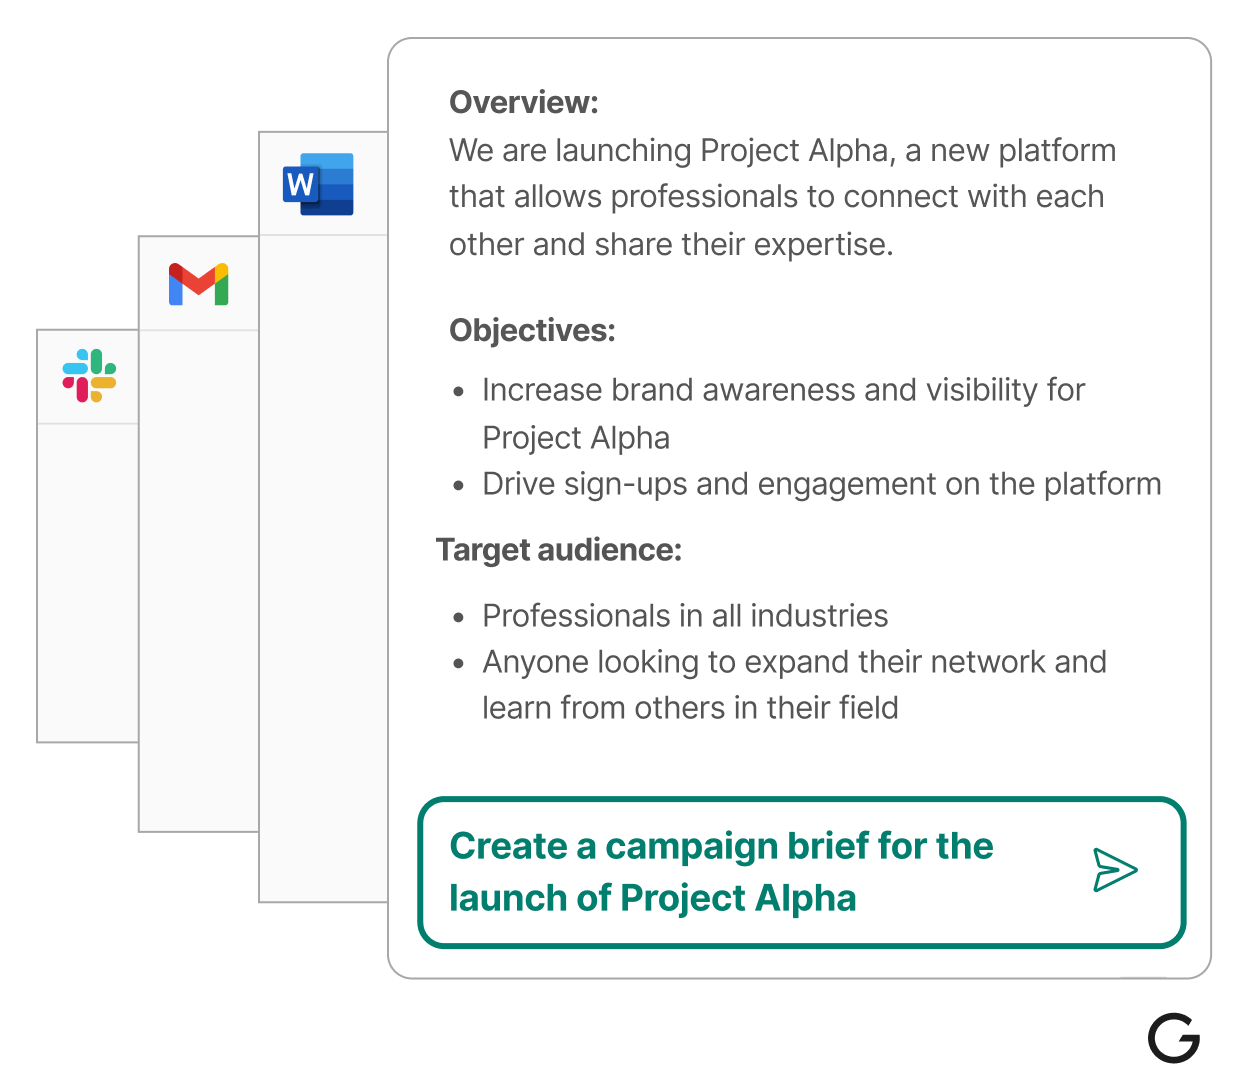 Showing how Grammarly can create a campaign brief from scratch